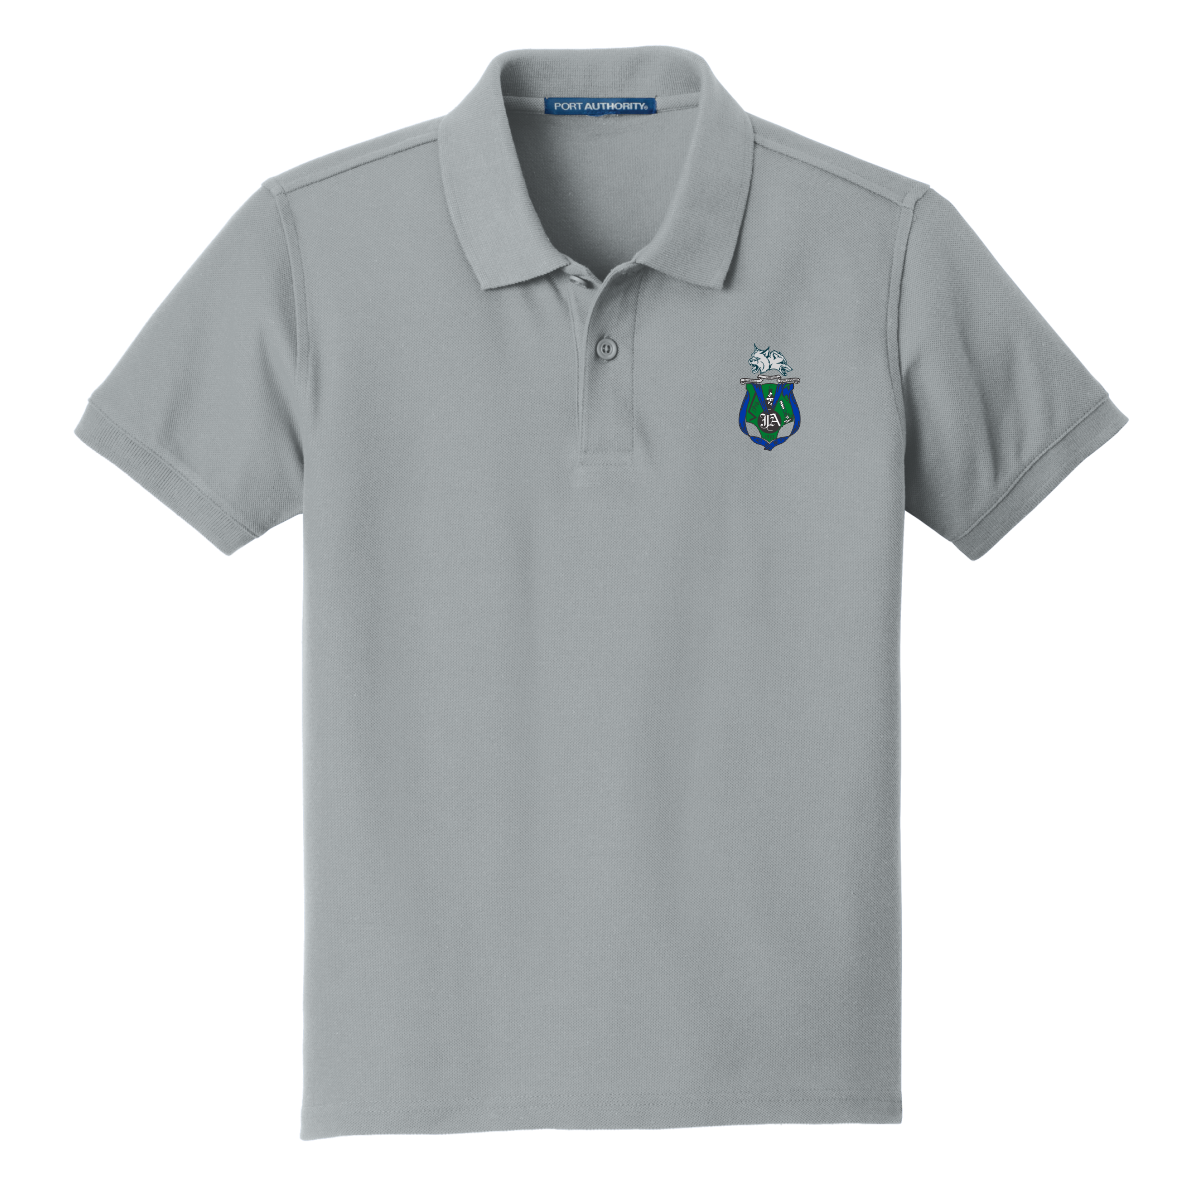 Jewett Academy Youth Embroidered Polo - Gusty Grey (Youth Size)- 6th GRADE ONLY